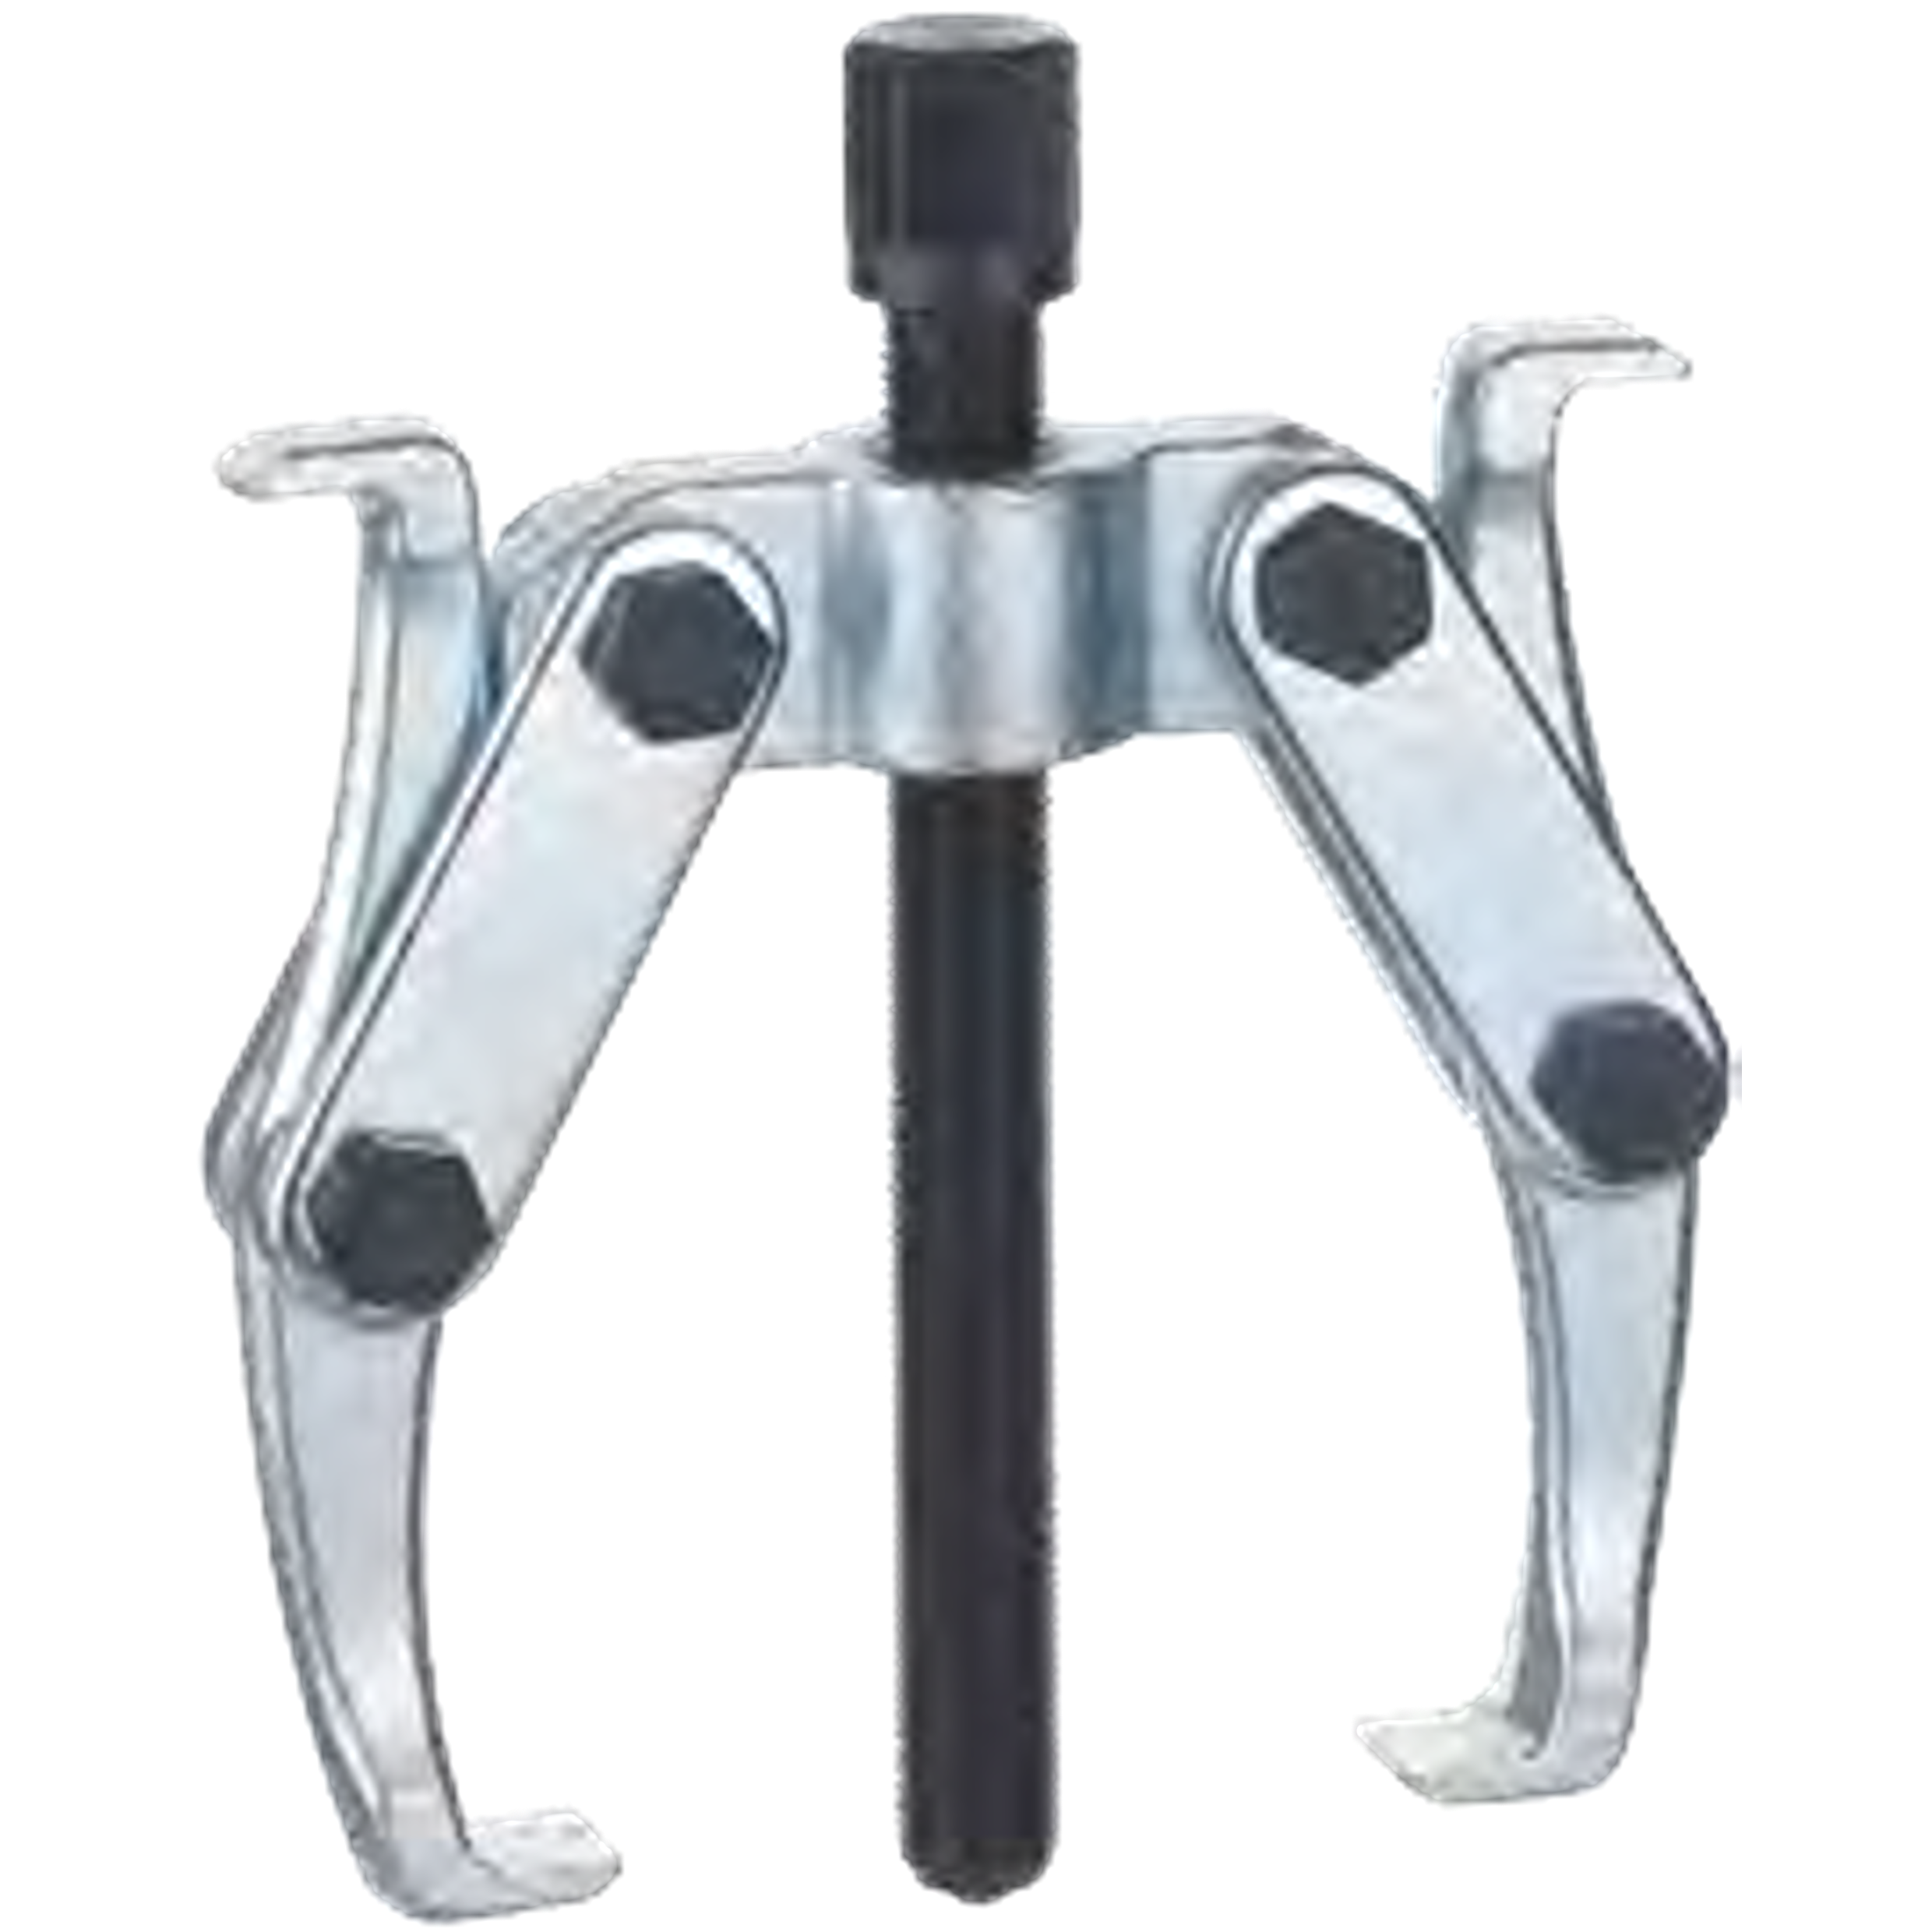 NEXUS 132 Strap-Puller, 2-Arms - Premium Mechanical Pullers from NEXUS - Shop now at Yew Aik.